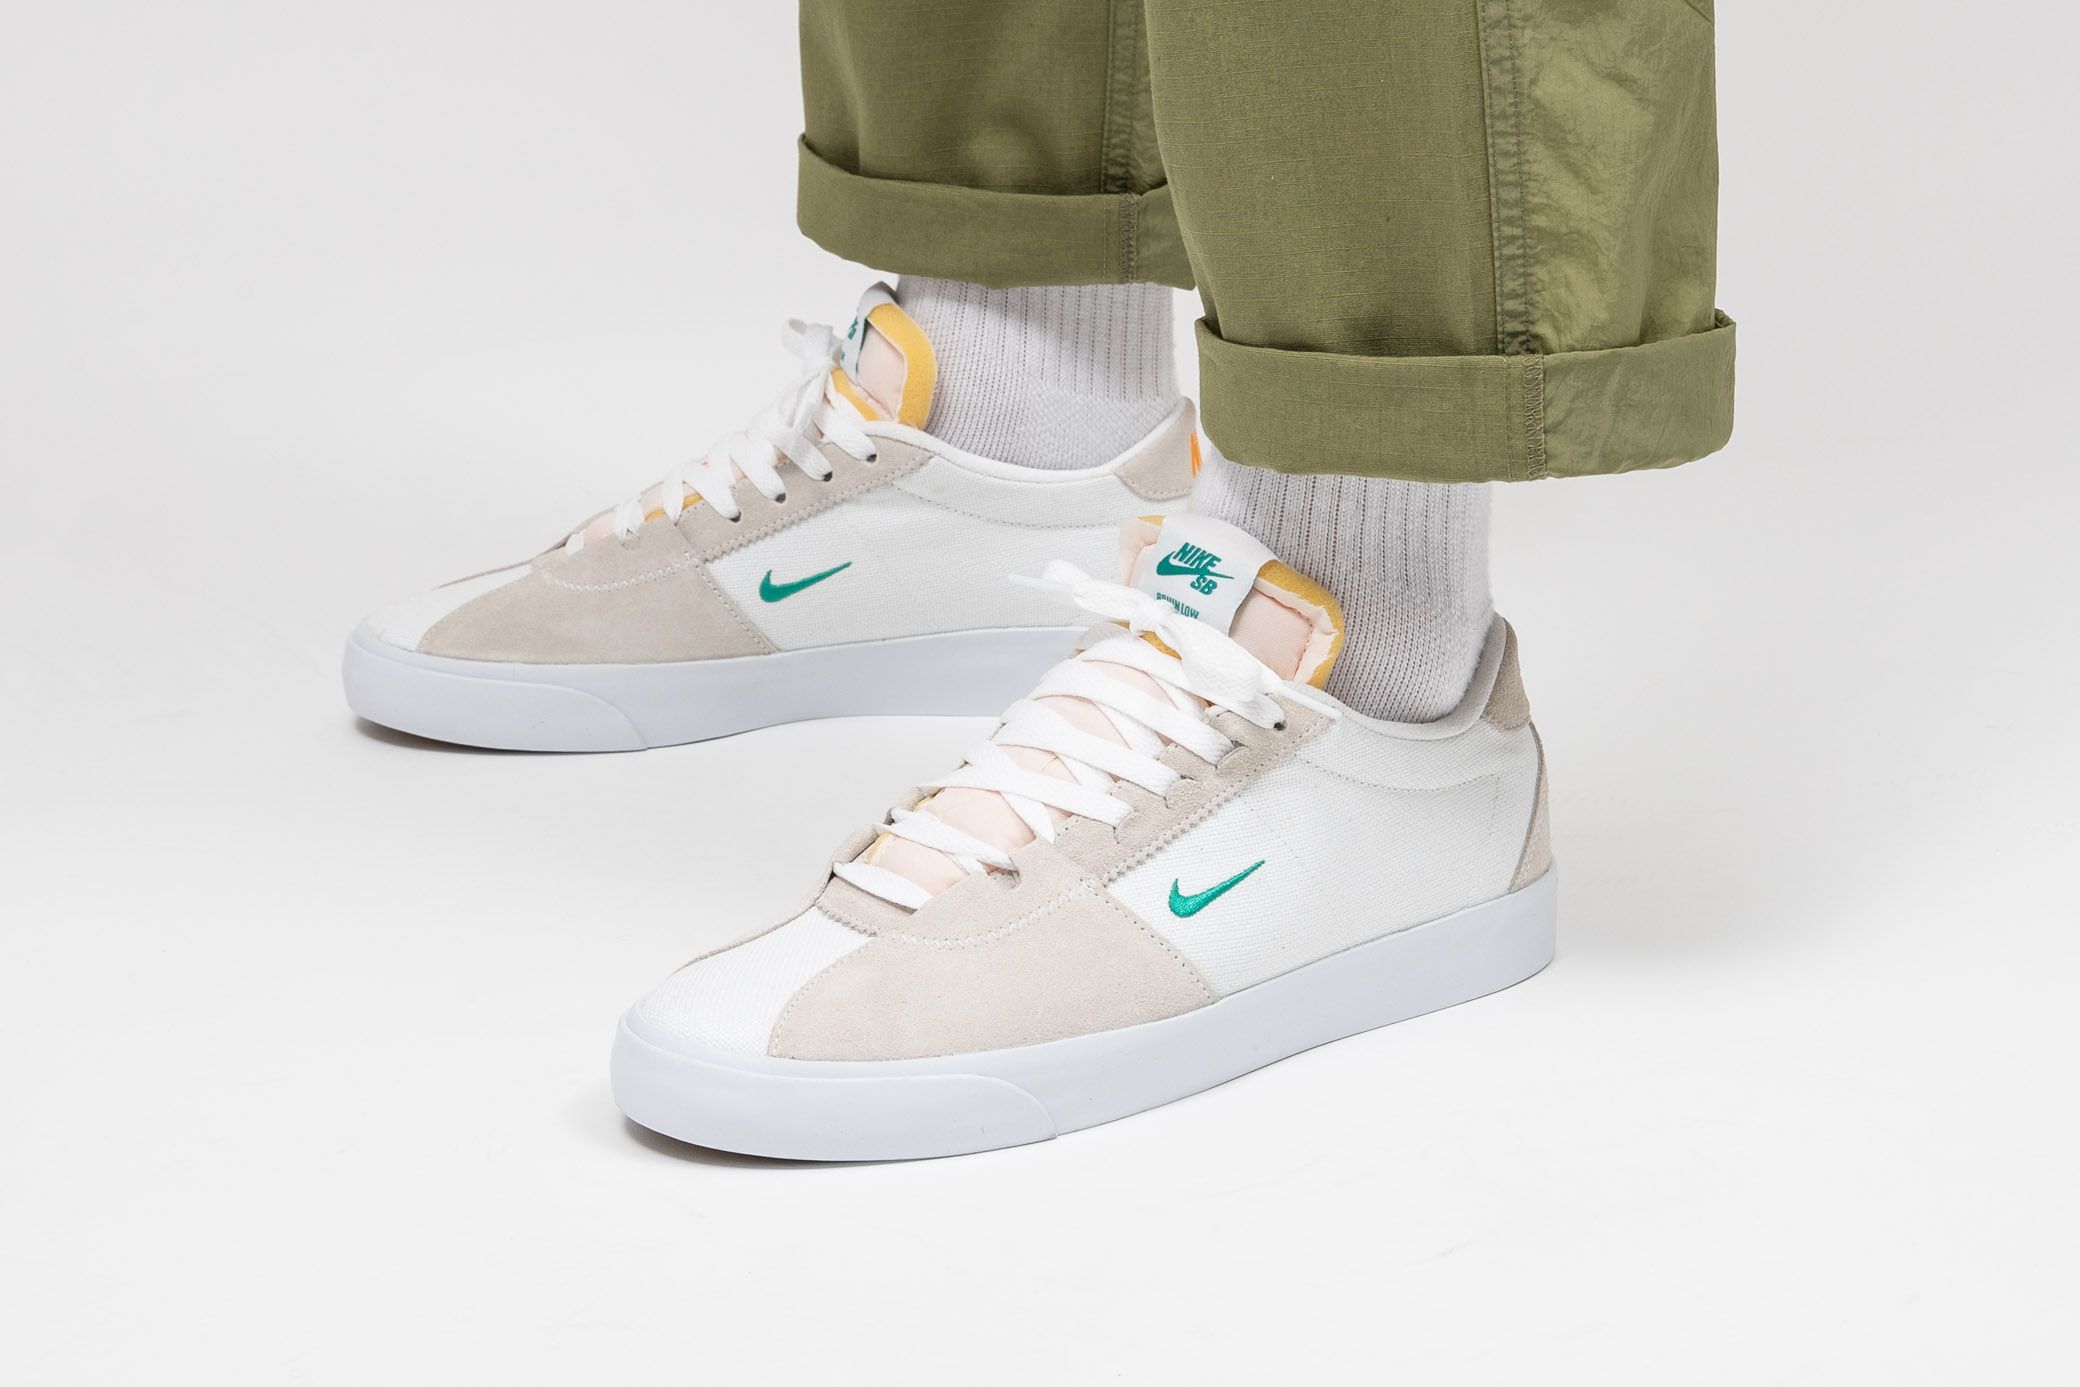 taquigrafía Actor vanidad Titolo on Twitter: "Frayed stitching, exposed foam and a mix of materials  create a patched look on these NIKE SB Air Zoom Bruin Edge in  "White/Neptune Green" 🌱 shop here ➡️ https://t.co/76nfkiIfhl